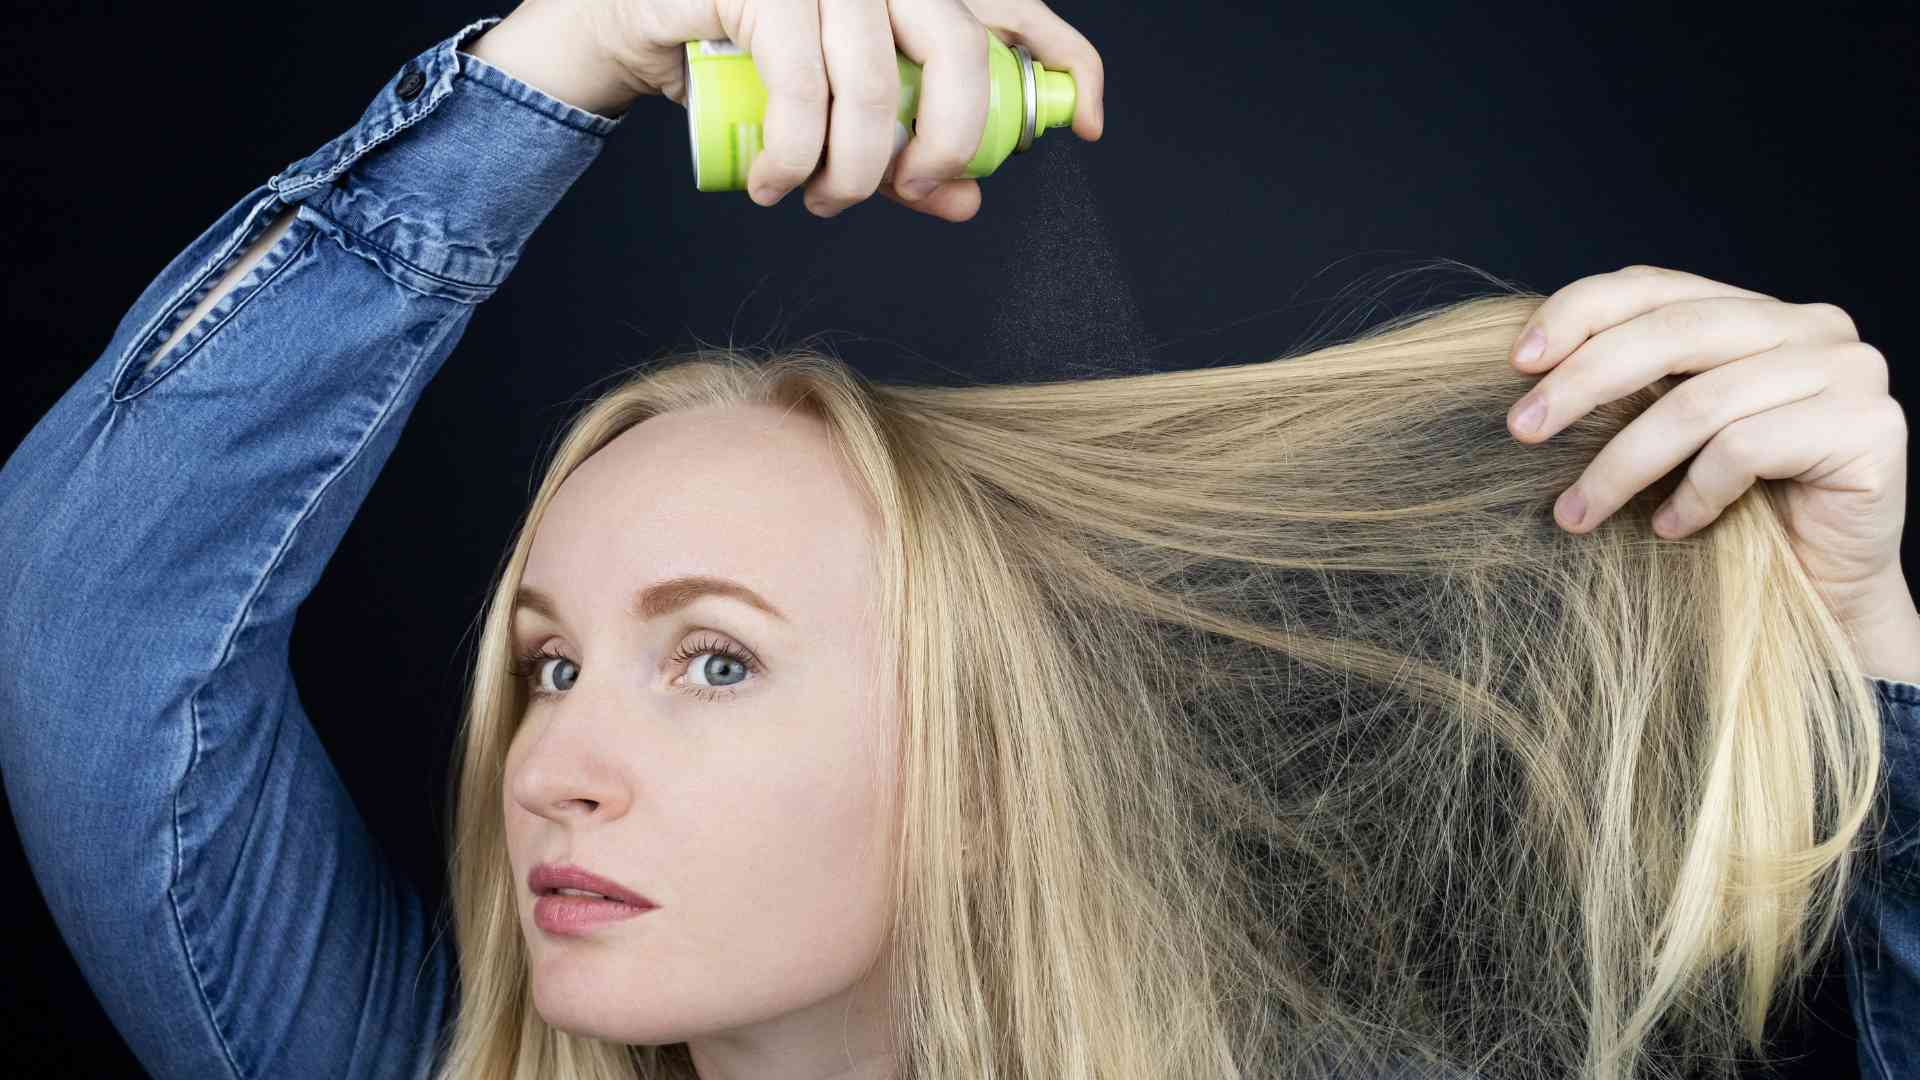 What are some effective natural remedies for preventing hair loss